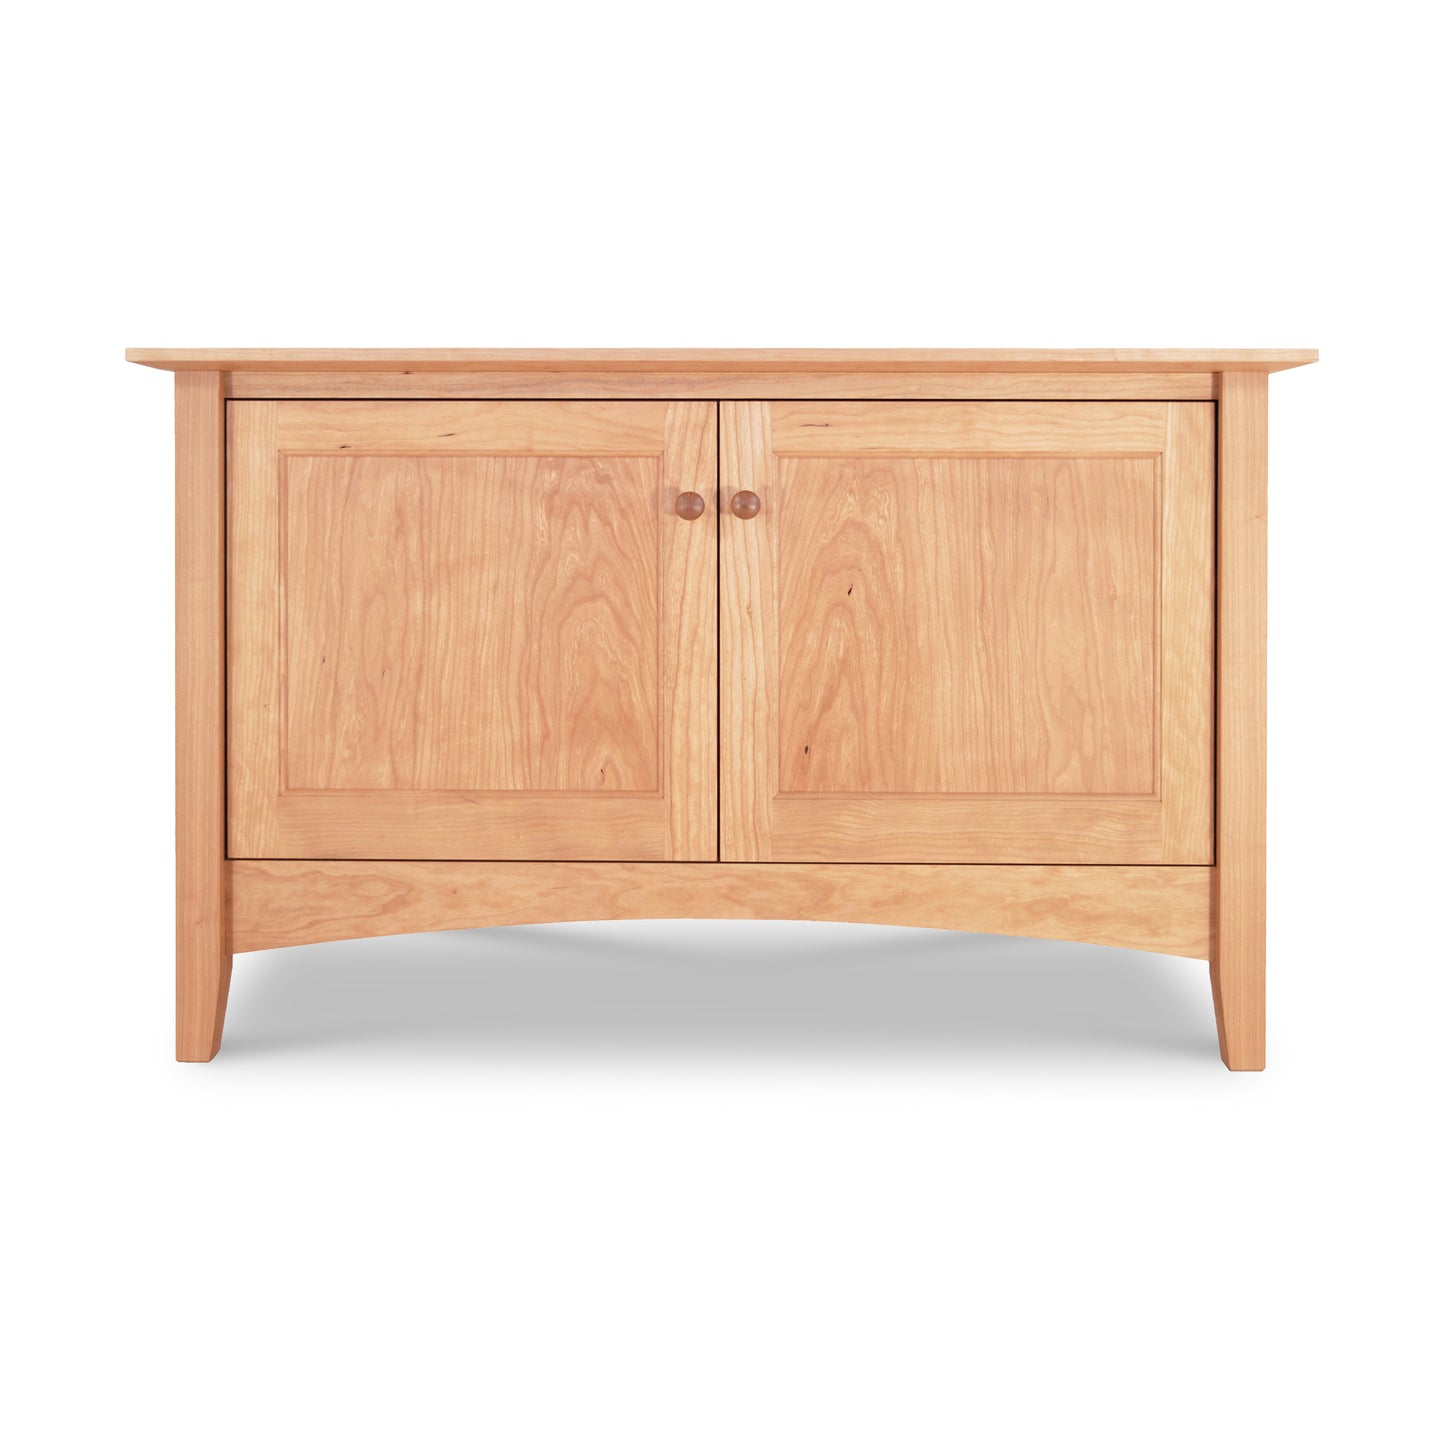 A small Maple Corner Woodworks American Shaker 48" TV Stand made of solid hardwoods, showcasing Vermont craftsmanship, with two doors and two drawers.